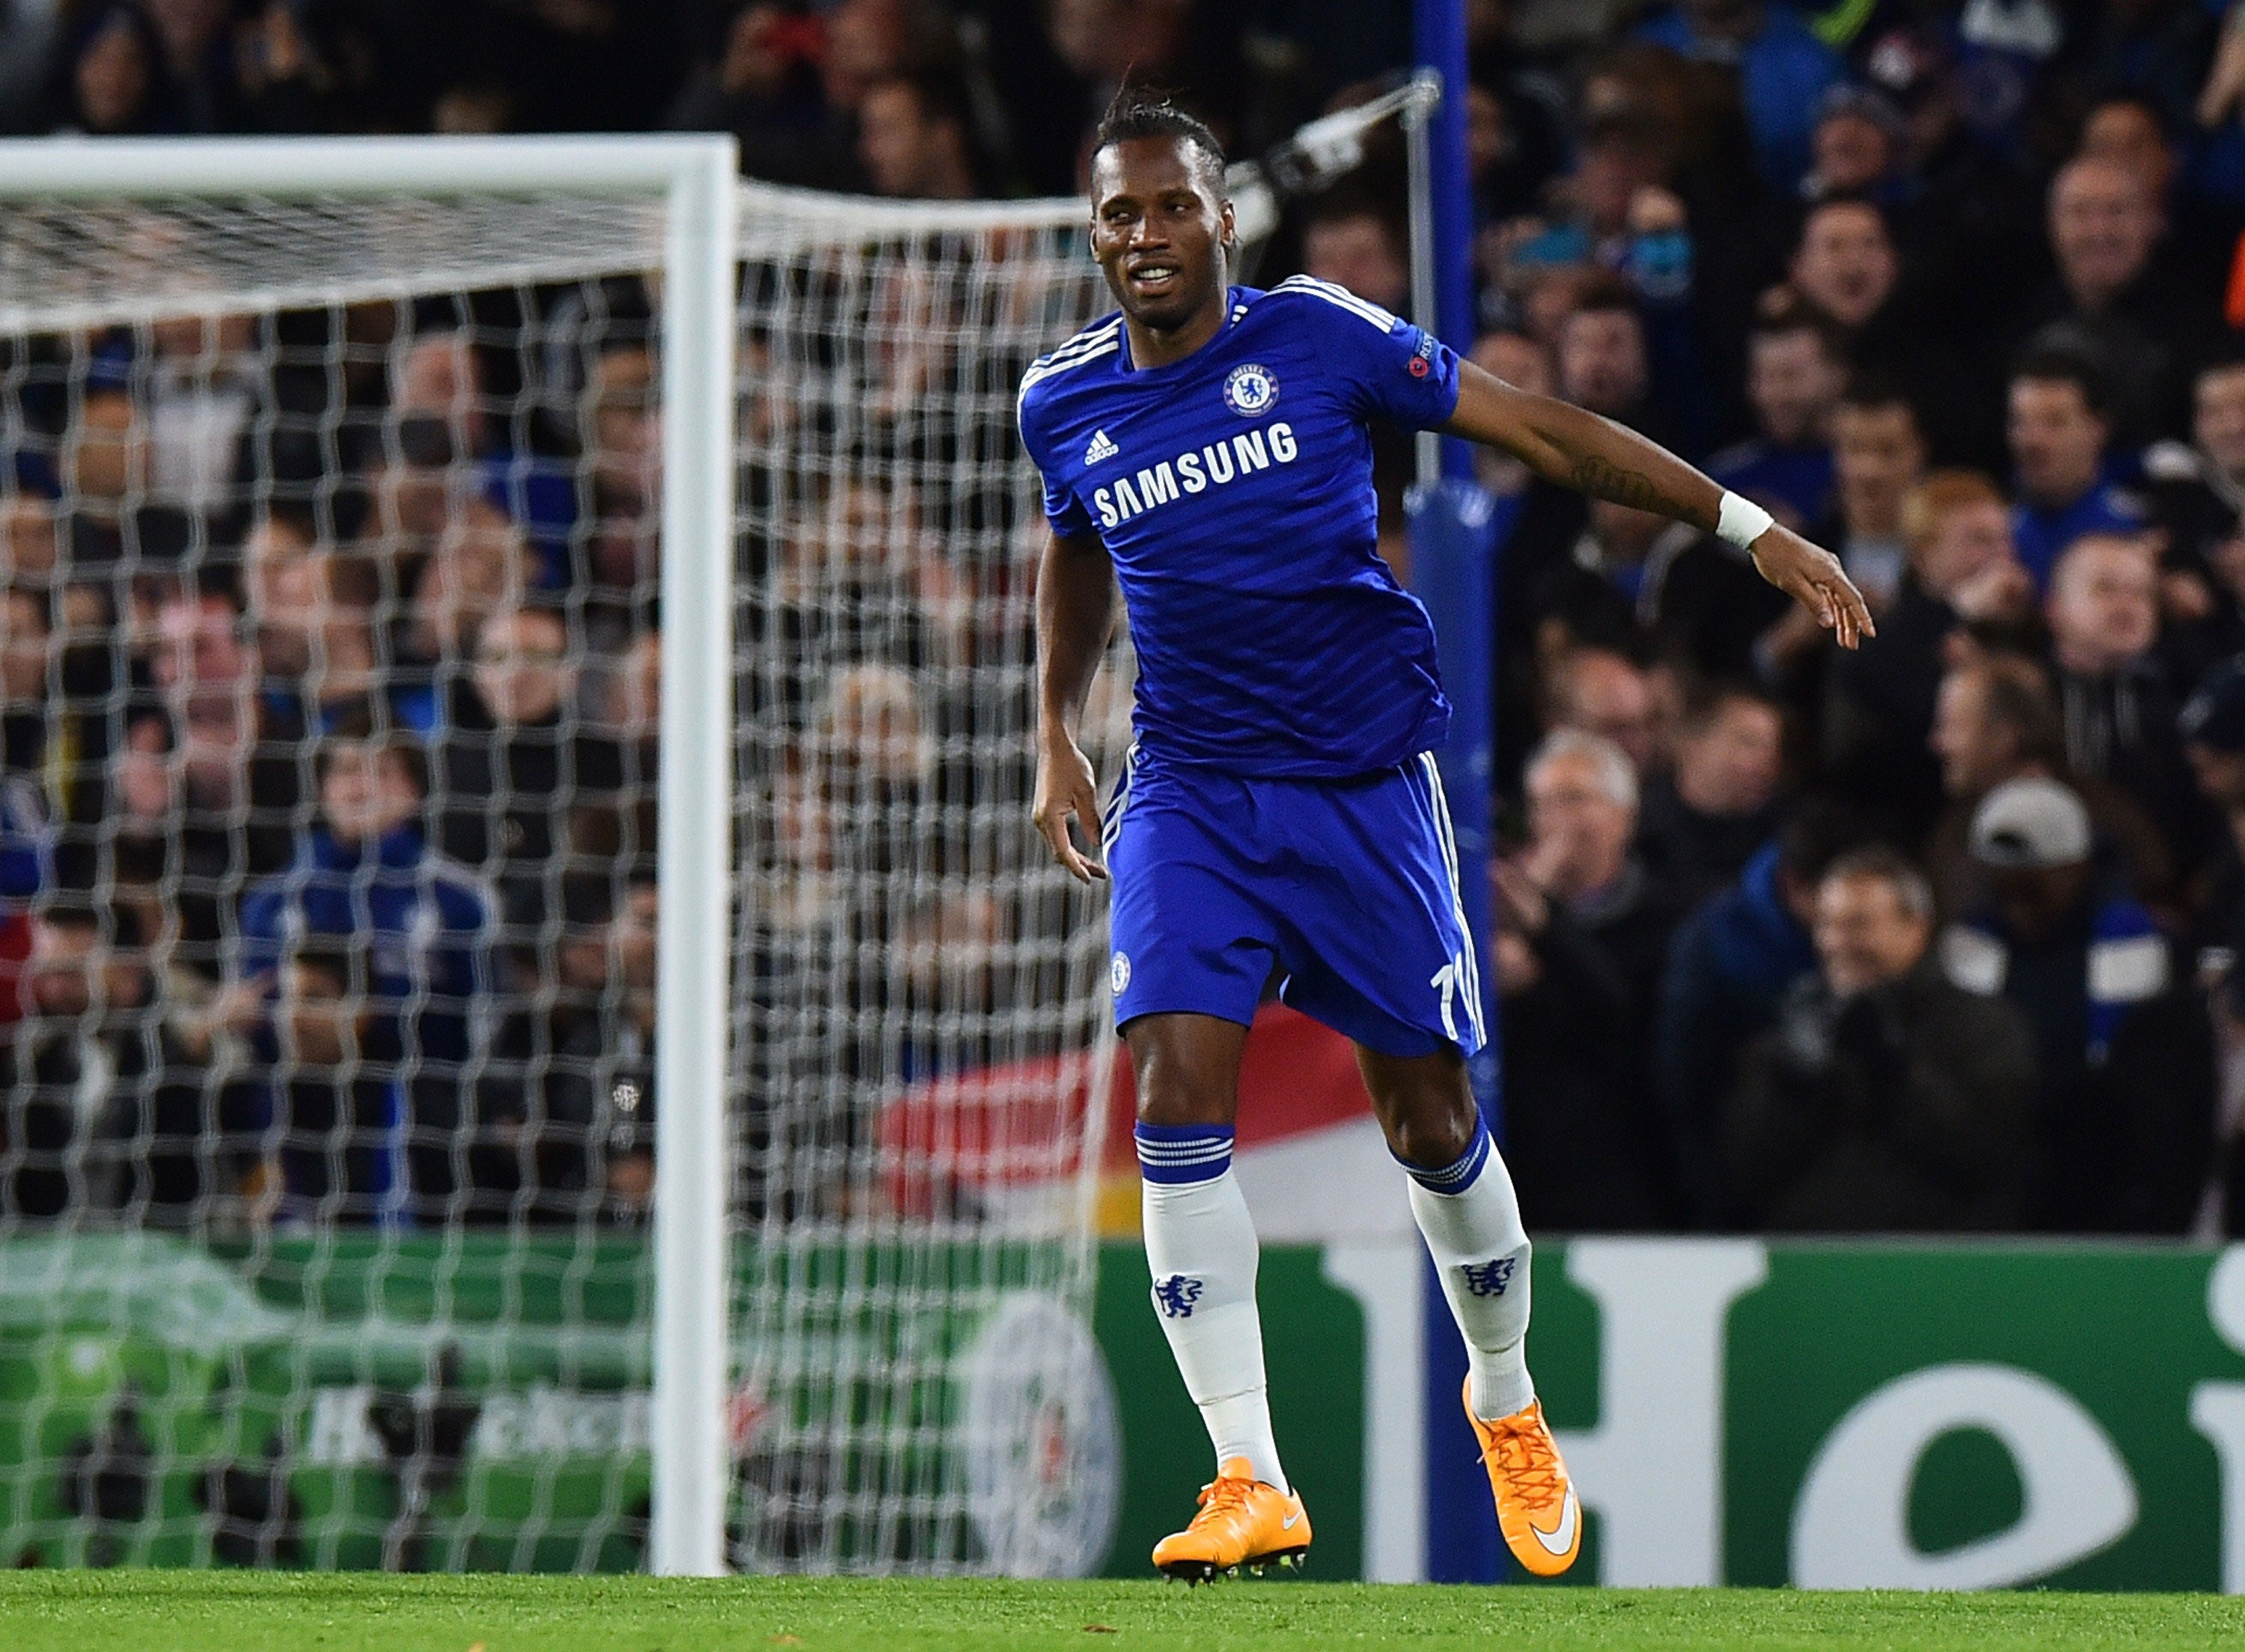 Drogba’s record against United is relatively poor. In 19 games against them he has scored just three goals